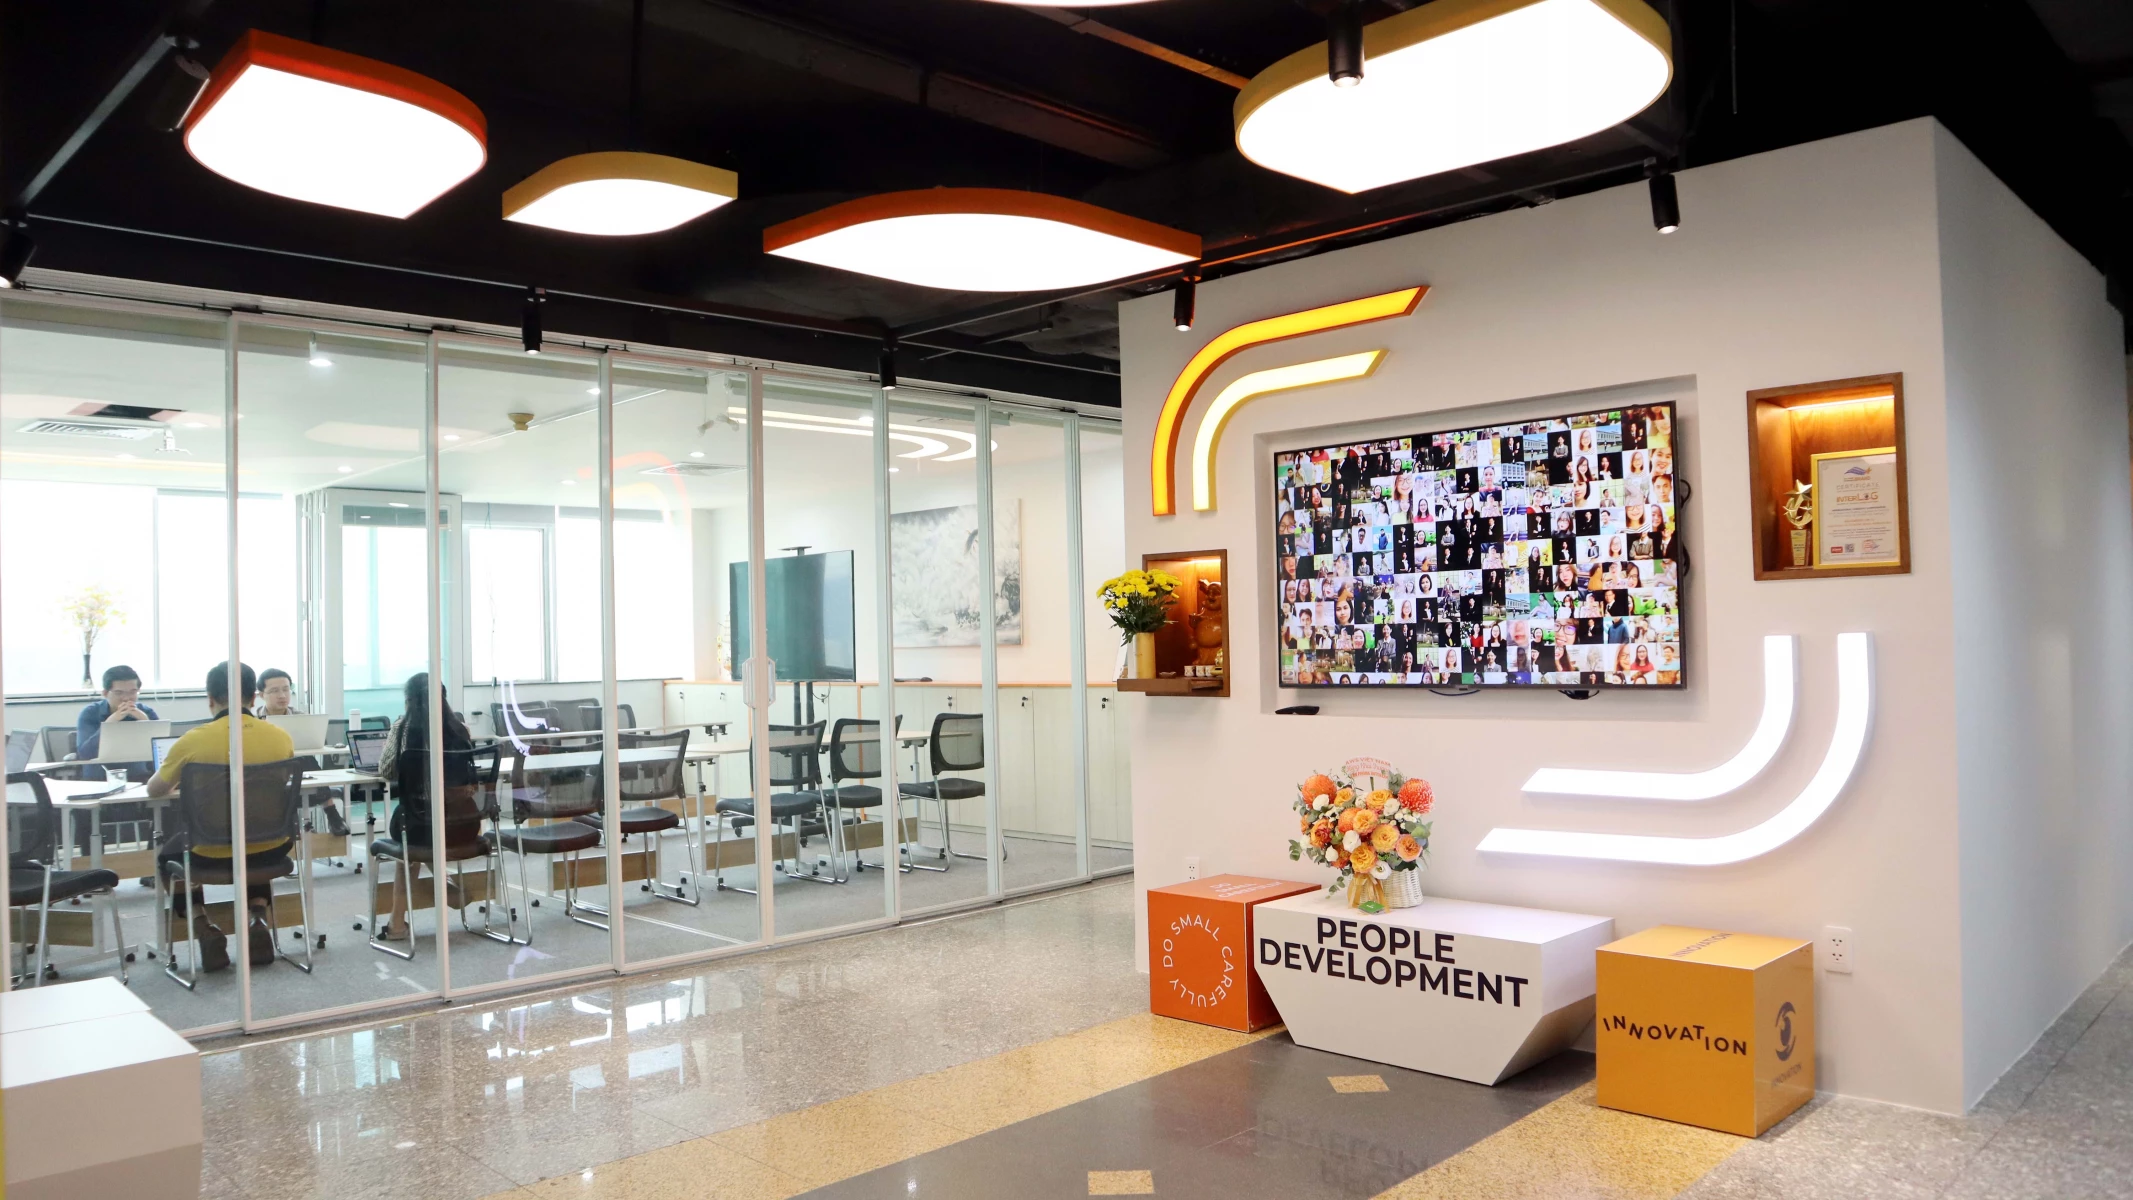 InterLOG inspires workspace with E.S.G and Innovation mission